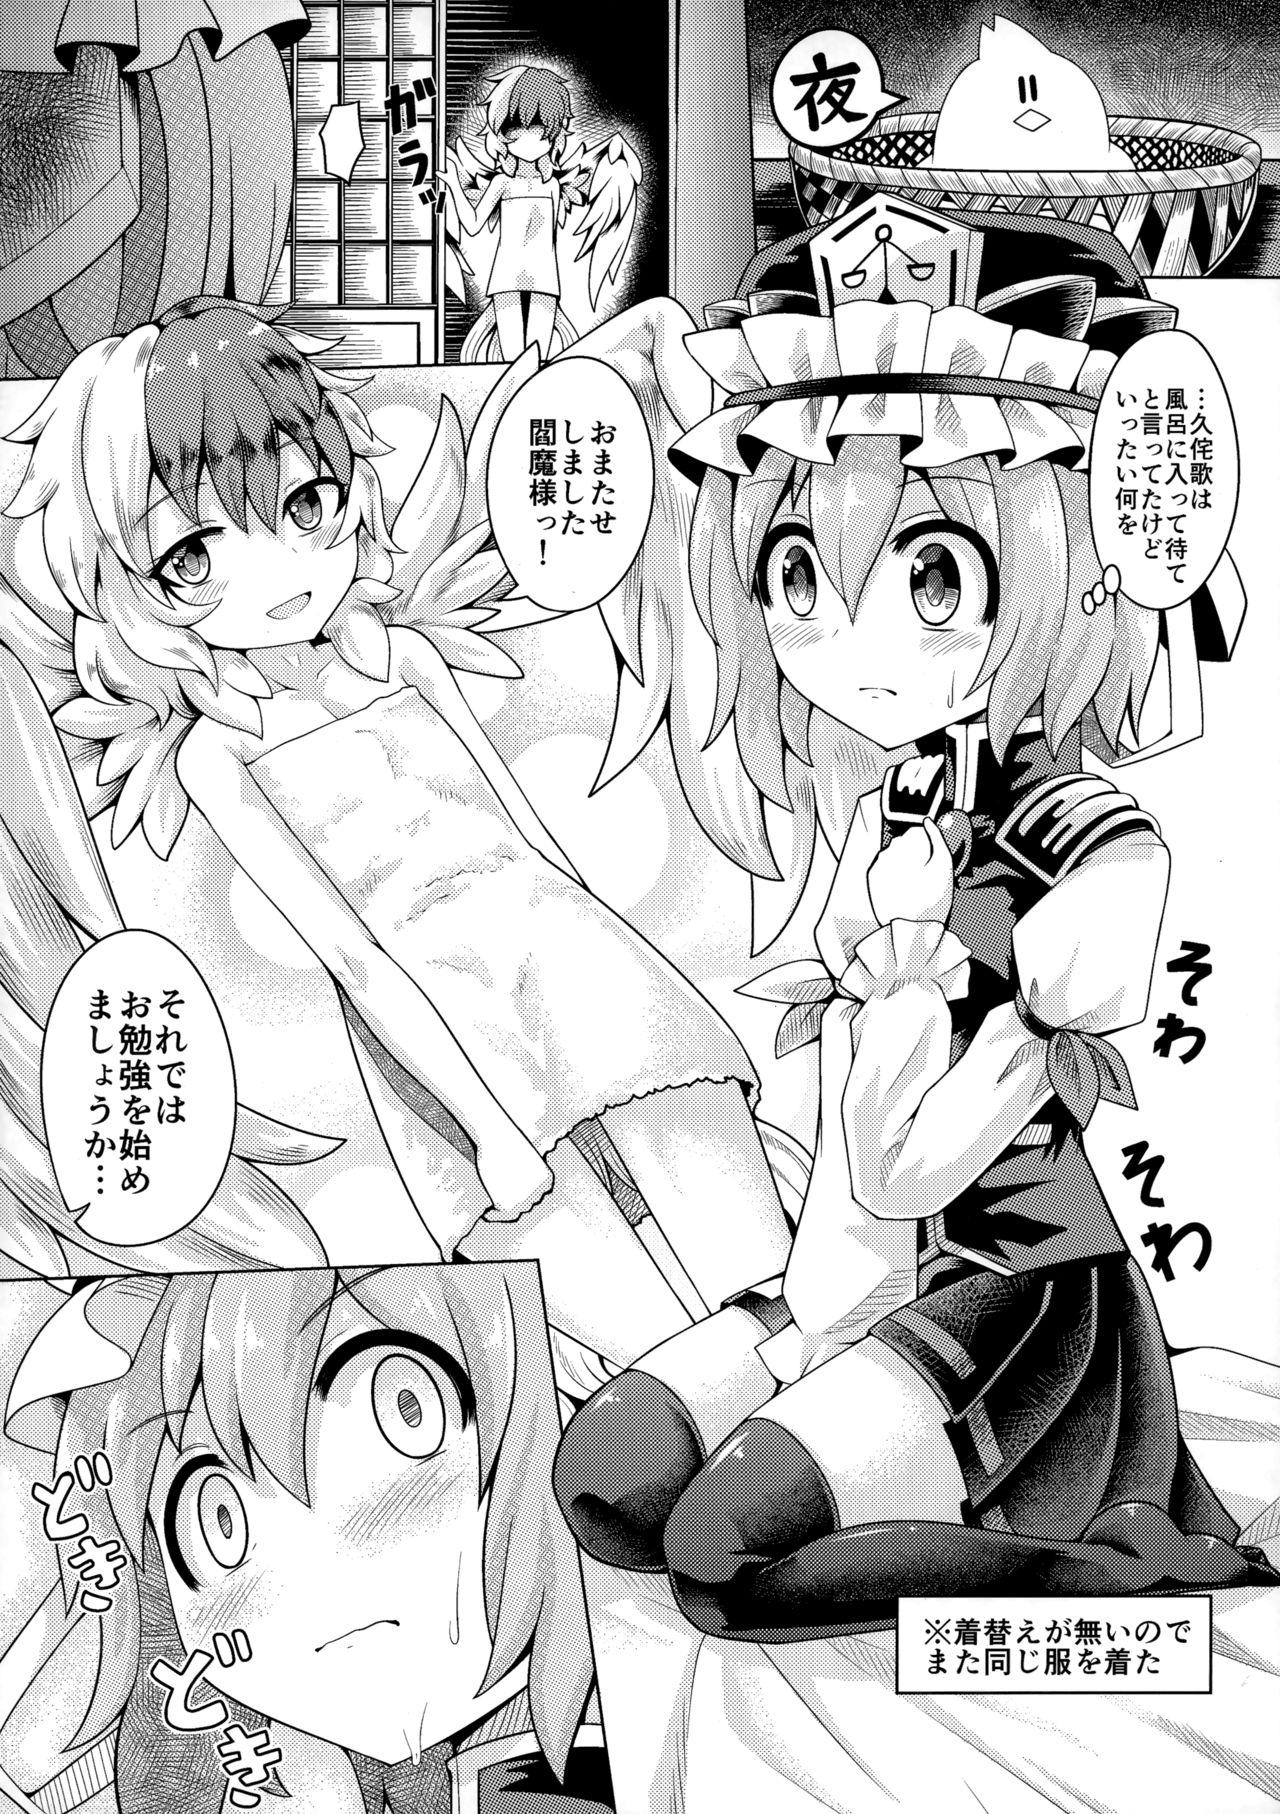 Bubble Butt Reverse Sexuality 9 - Touhou project Storyline - Page 5